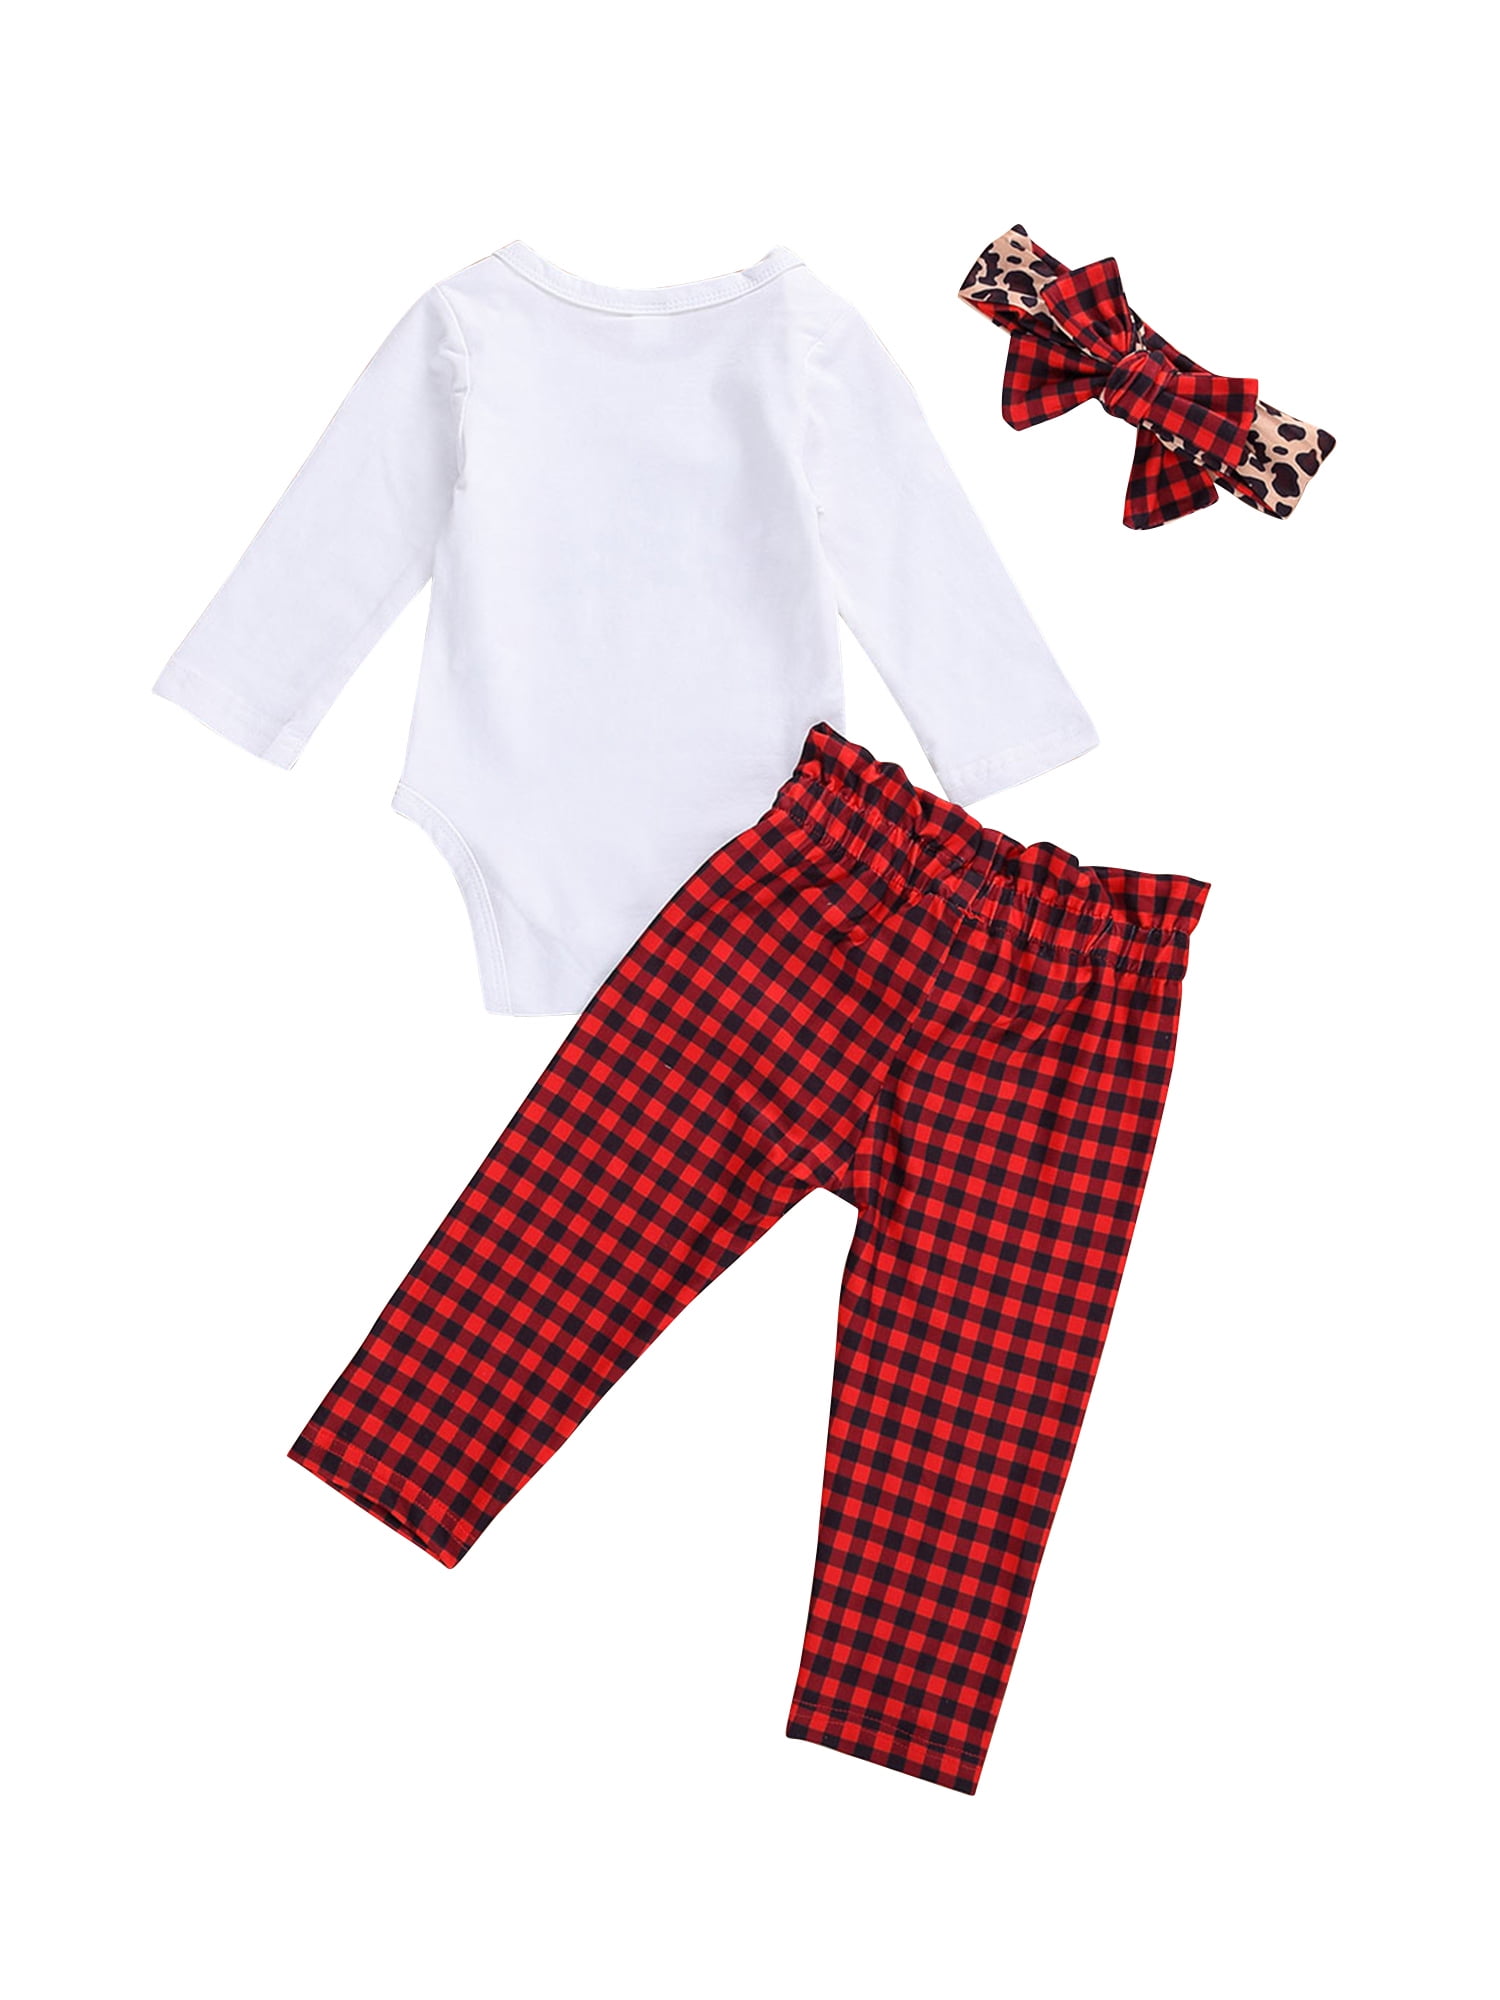 Details about   The Children's Place Red Plaid Christmas Dress Size 0-3 Months 